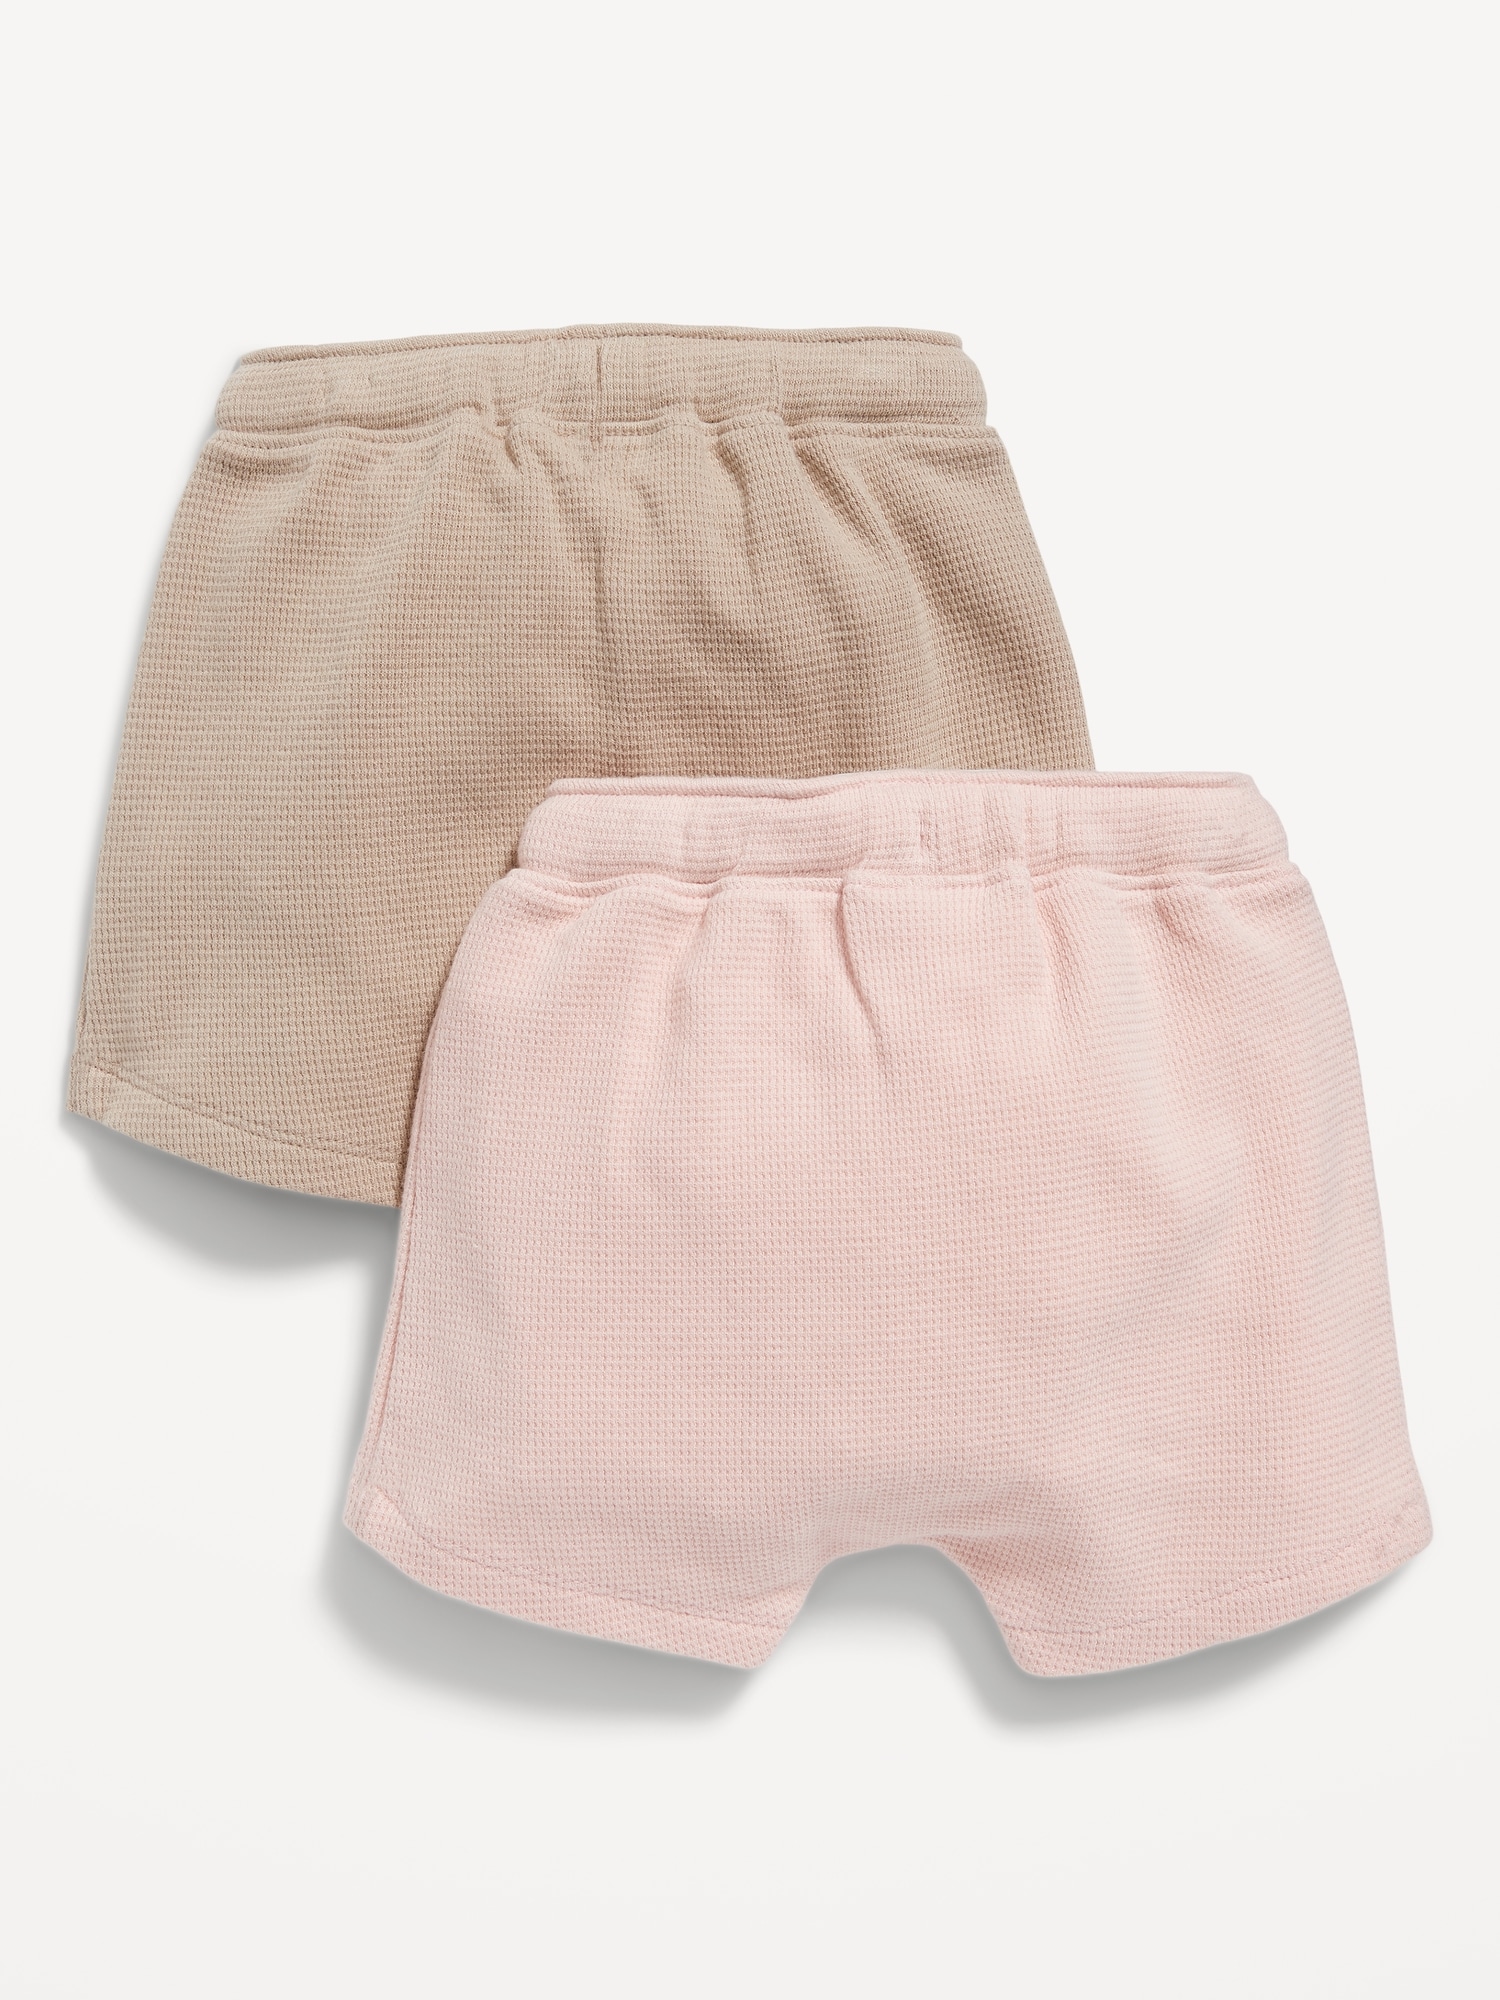 U-Shape Thermal-Knit Shorts Set for Baby | Old Navy